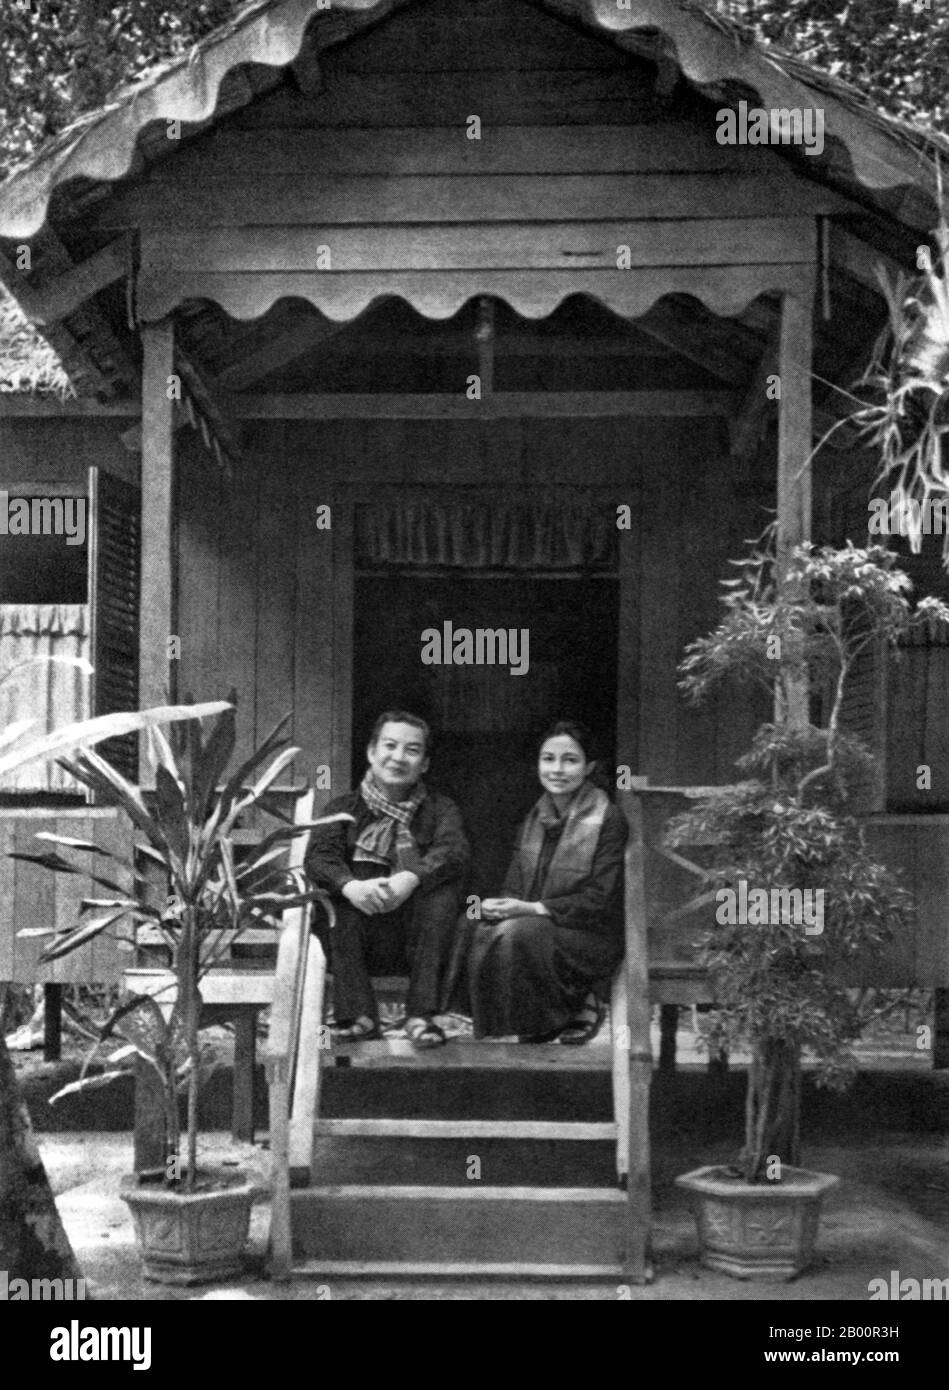 Cambodia: Prince Norodom Sihanouk and Princess Monique pose in Khmer Rouge  clothing on the steps of their wooden house in the Khmer Rouge 'liberated  zone', 1973. Between 1970 and 1975 Norodom Sihanouk